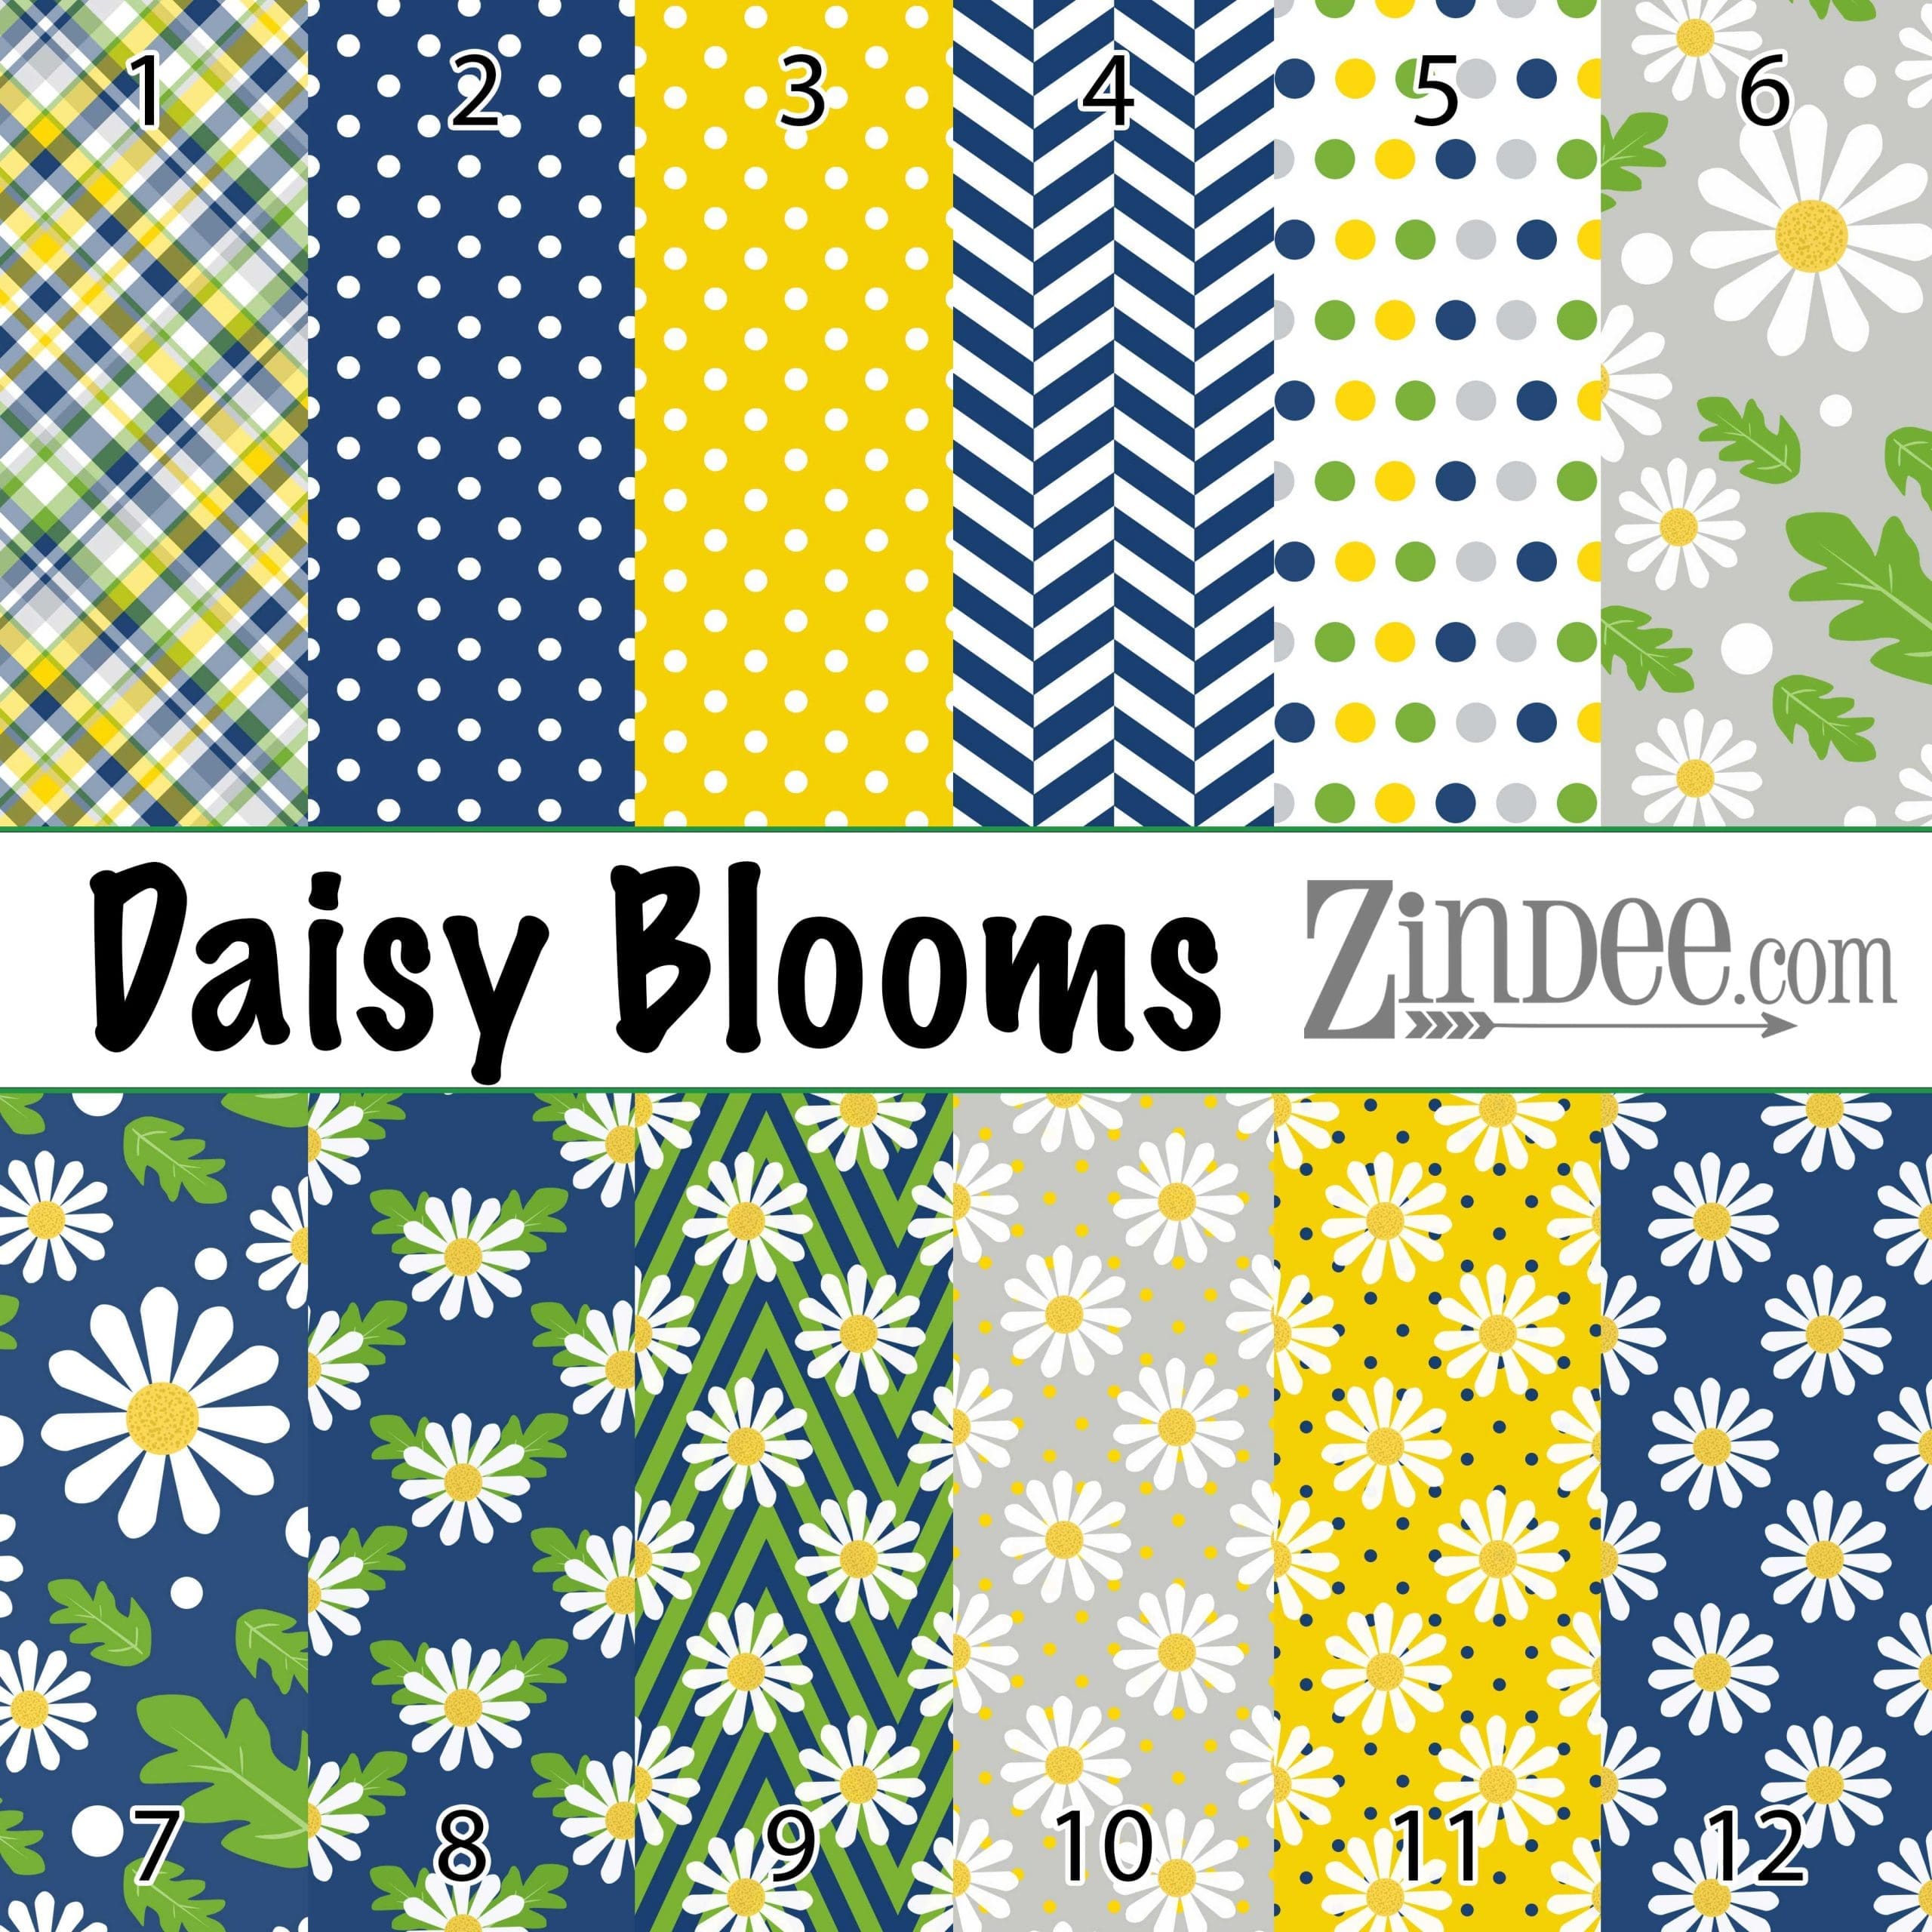 Daisy Blooms (vinyl) – Acrylic Blanks, Stickers, Printed Vinyl, Glitter and  more!